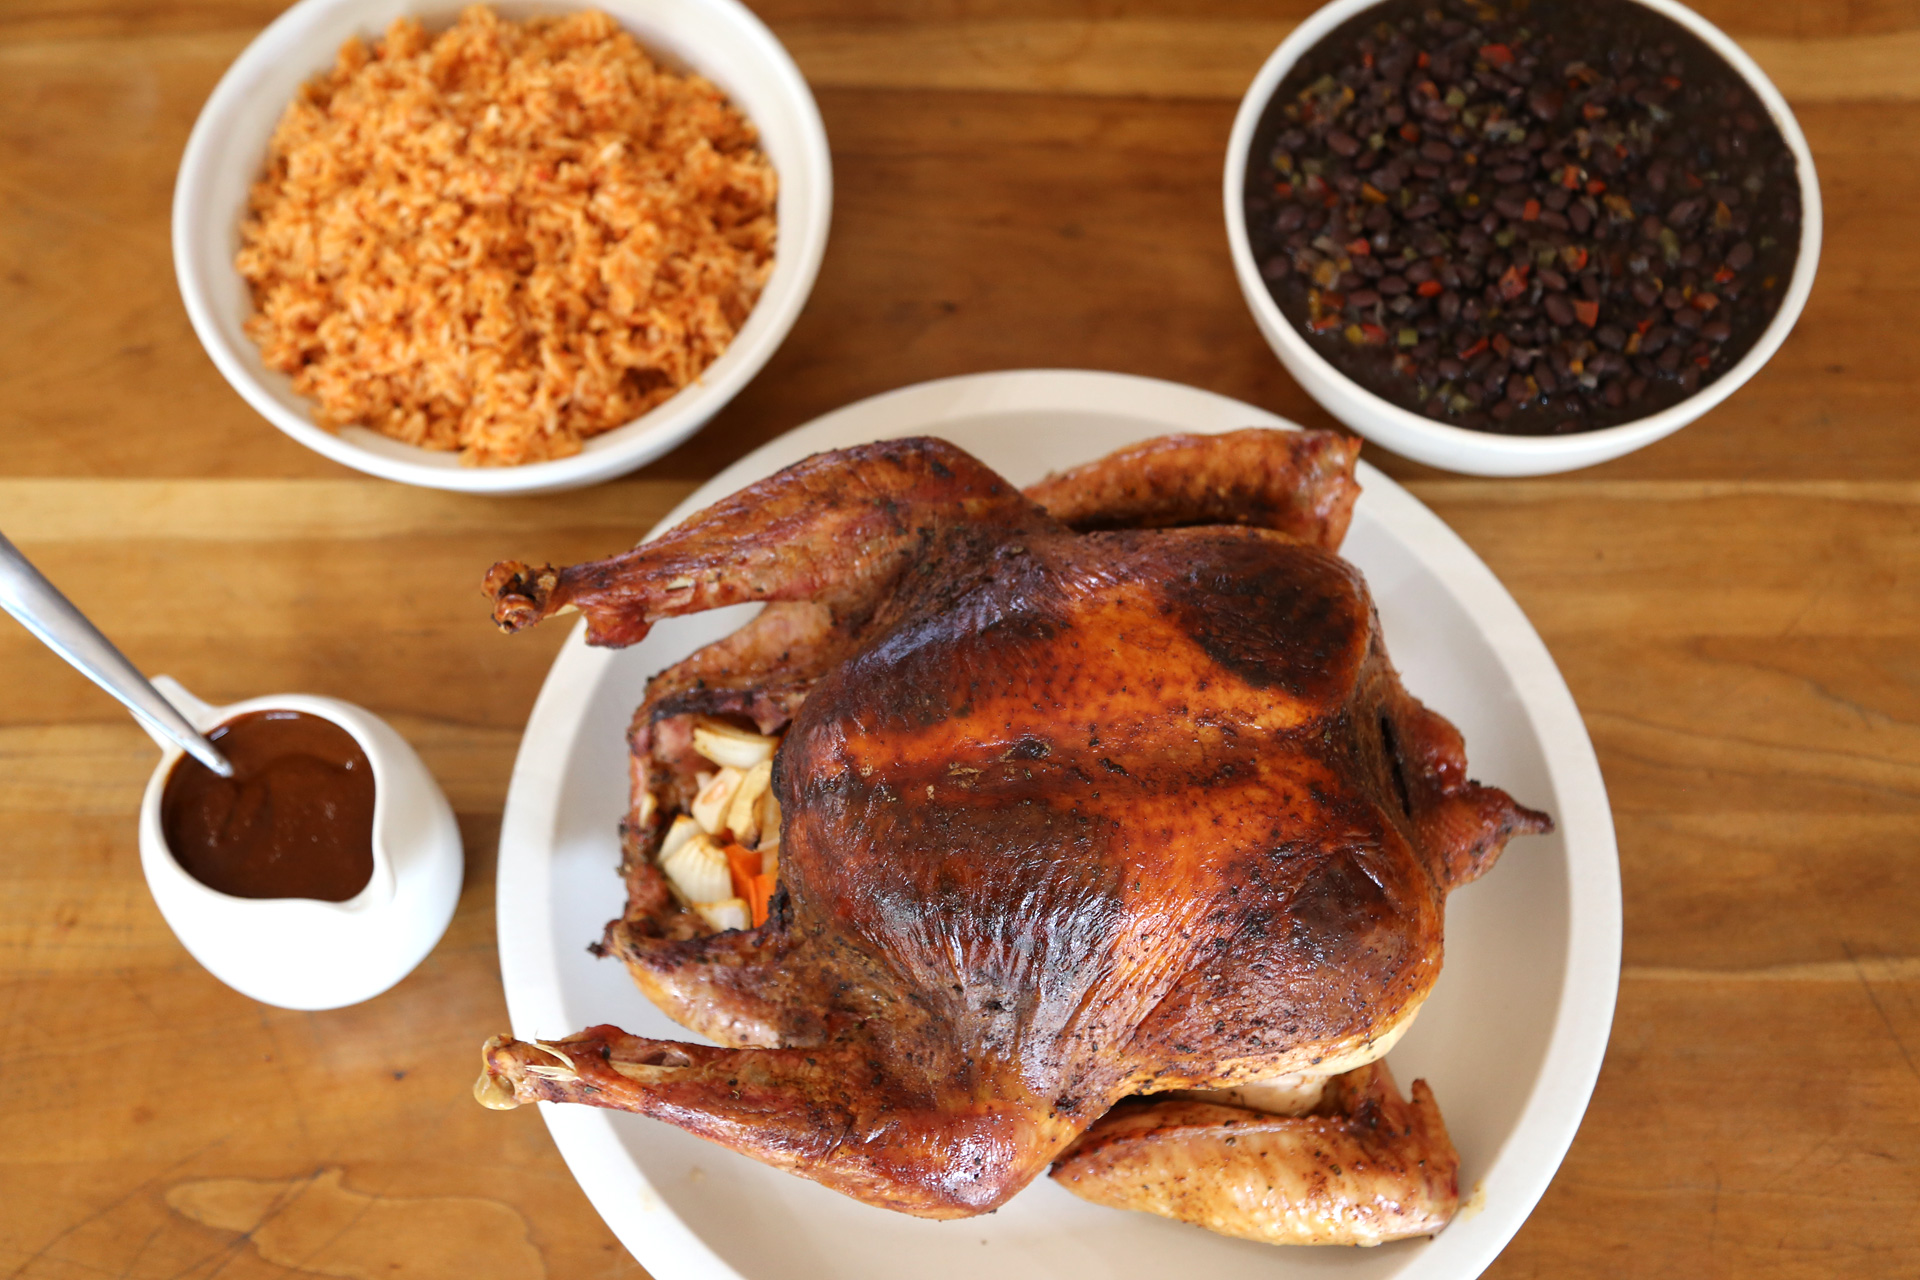 Chile-Rubbed Roast Turkey served with Savory Black Beans, Mexican Rice and Mole Gravy.